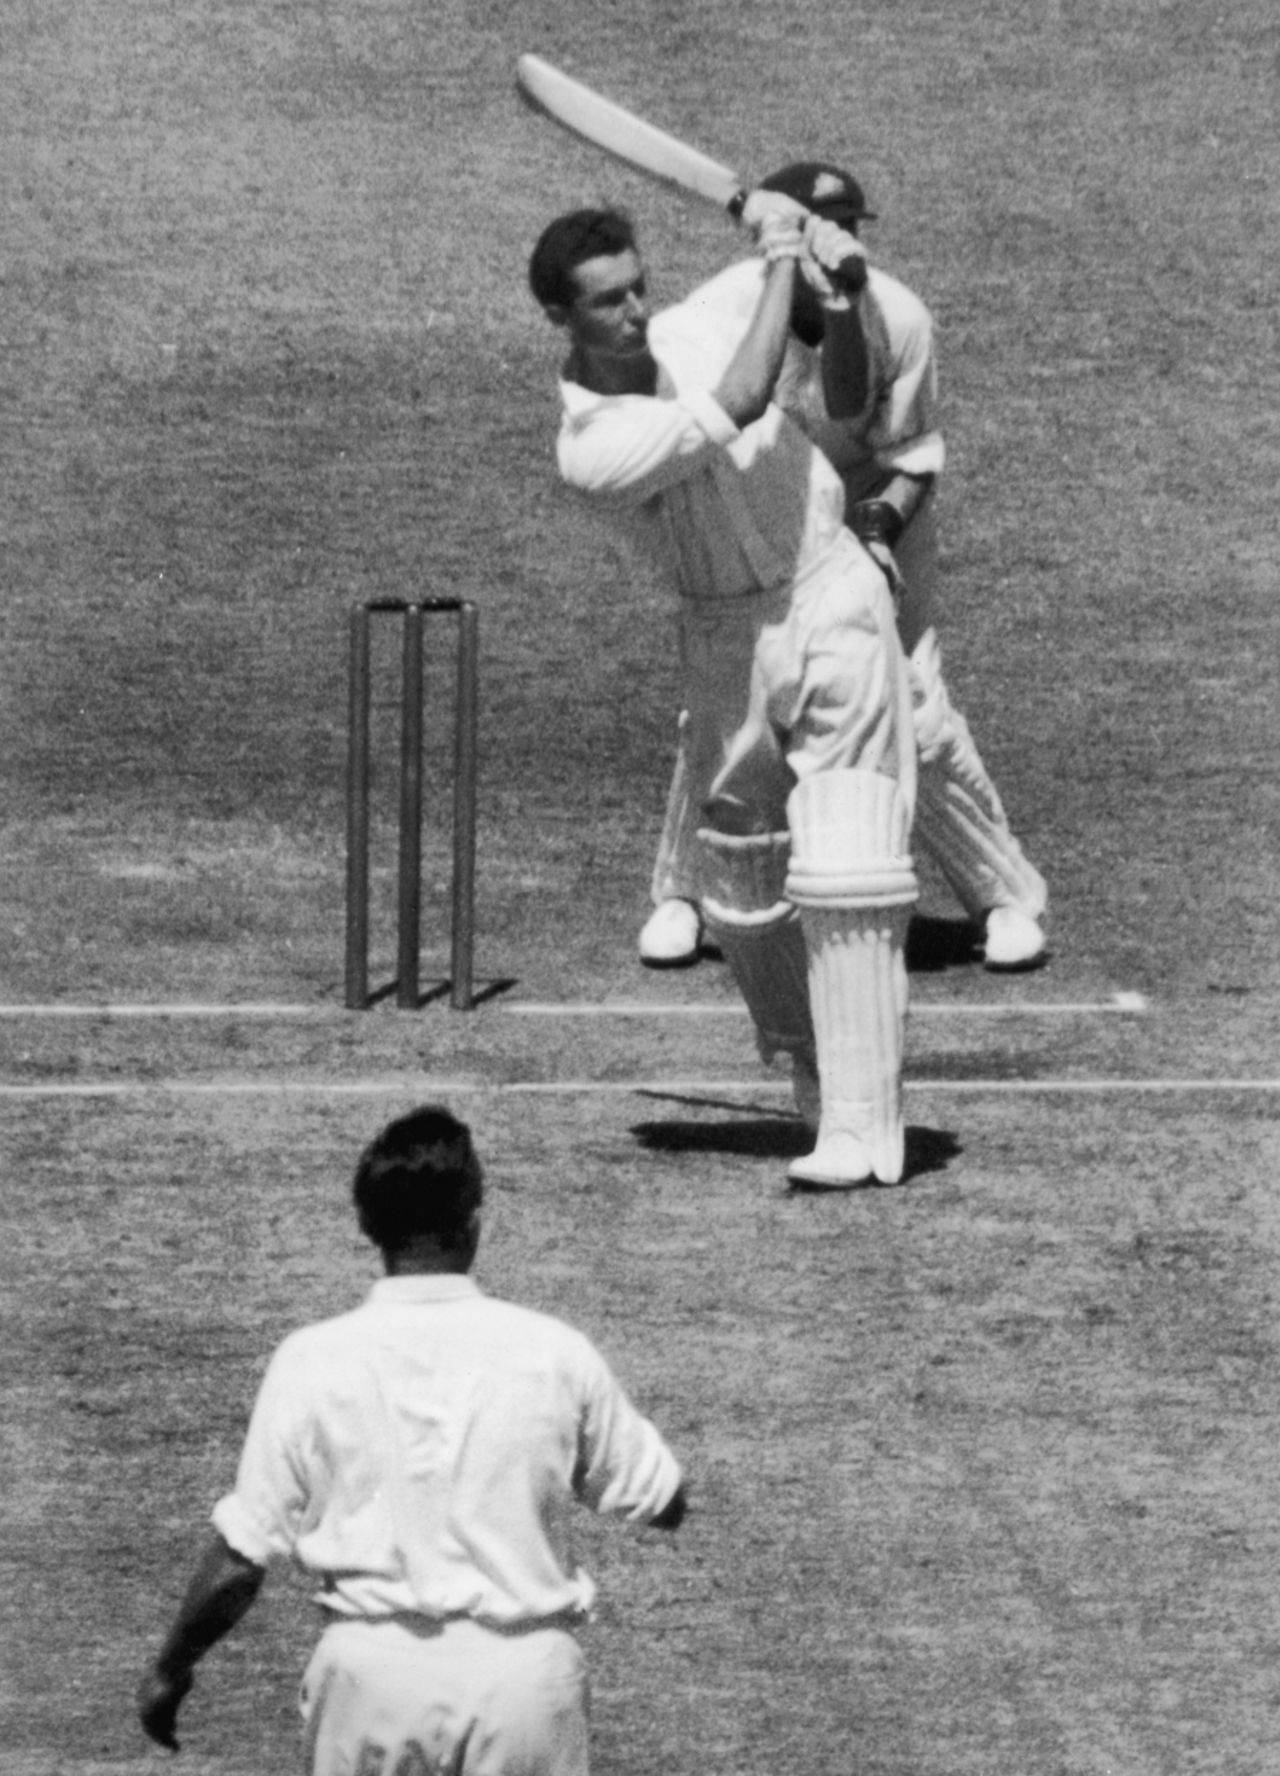 Reg Simpson batting during his innings of 156 not out at the MCG, Australia v England, 5th Test, Melbourne, February 27, 1951